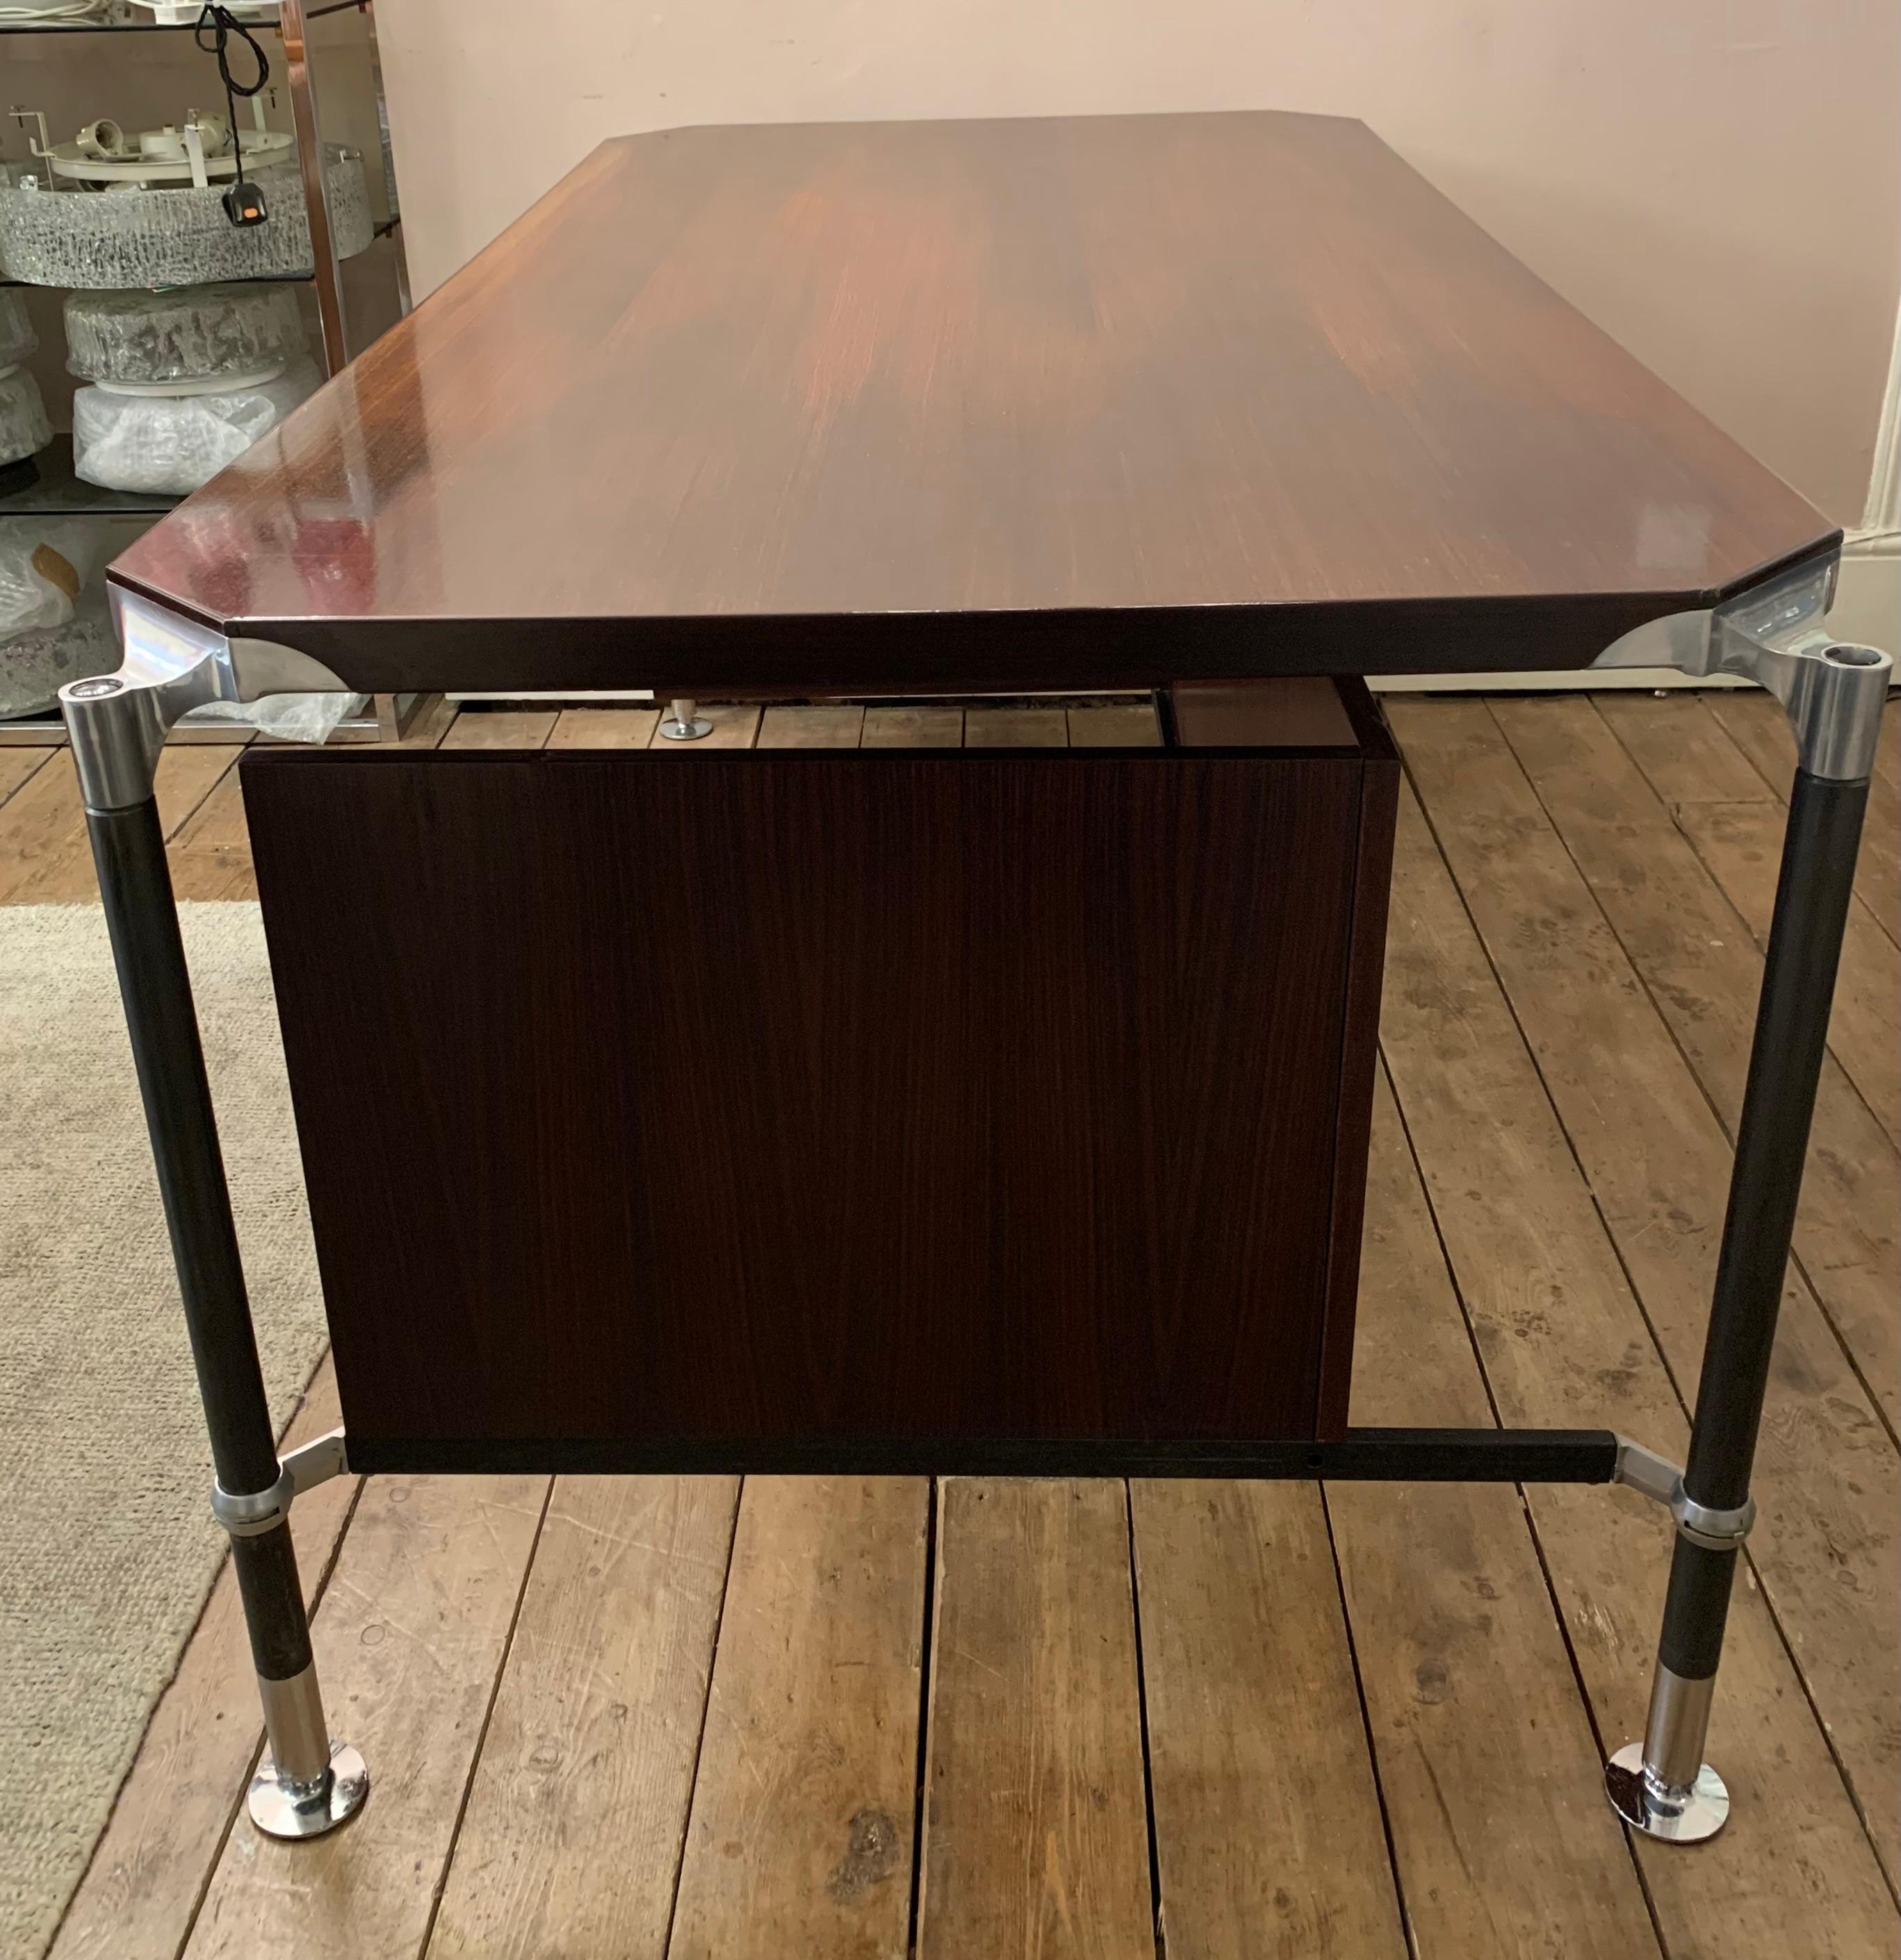 A very large Italian 'President's' office desk designed by Ico & Luisa Parisi for MIM Italy during the 1960s. The polished rosewood desk top is supported by beautifully detailed aluminium corner joints which the black-lacquered steel legs connect